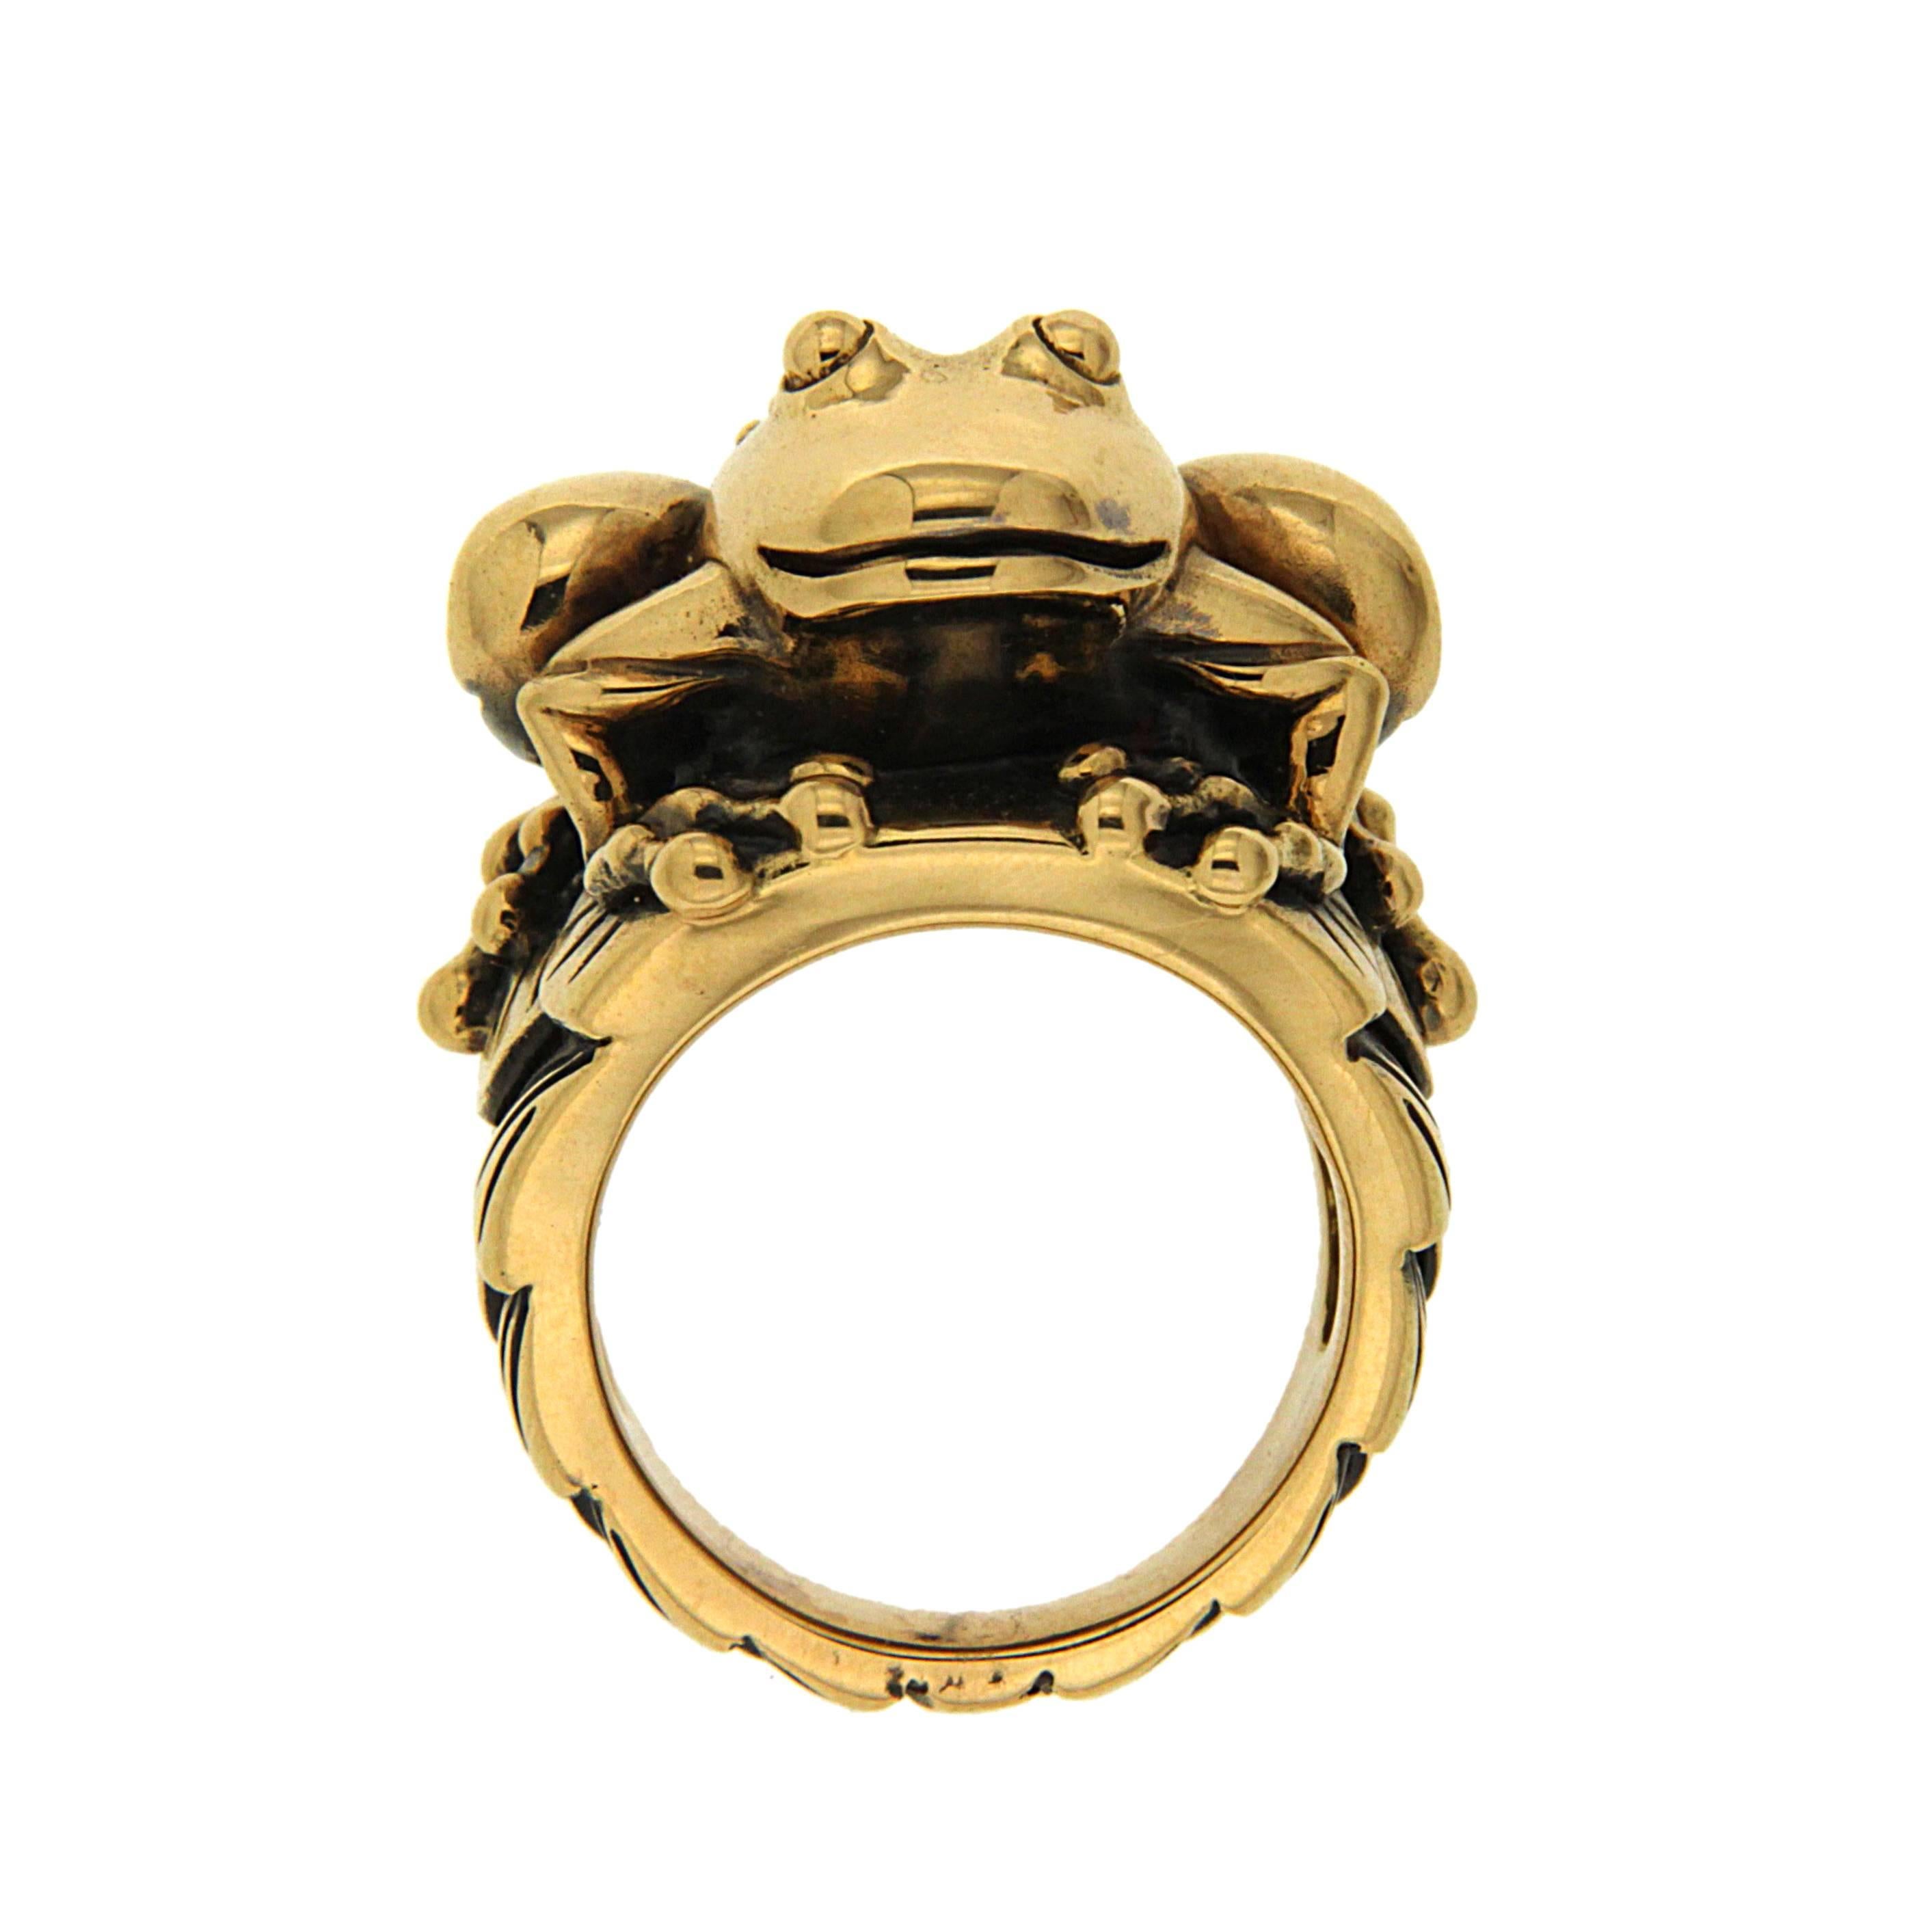 This lovely frog ring is made in 18kt yellow gold. Finger Sizes can be adjusted upon request.